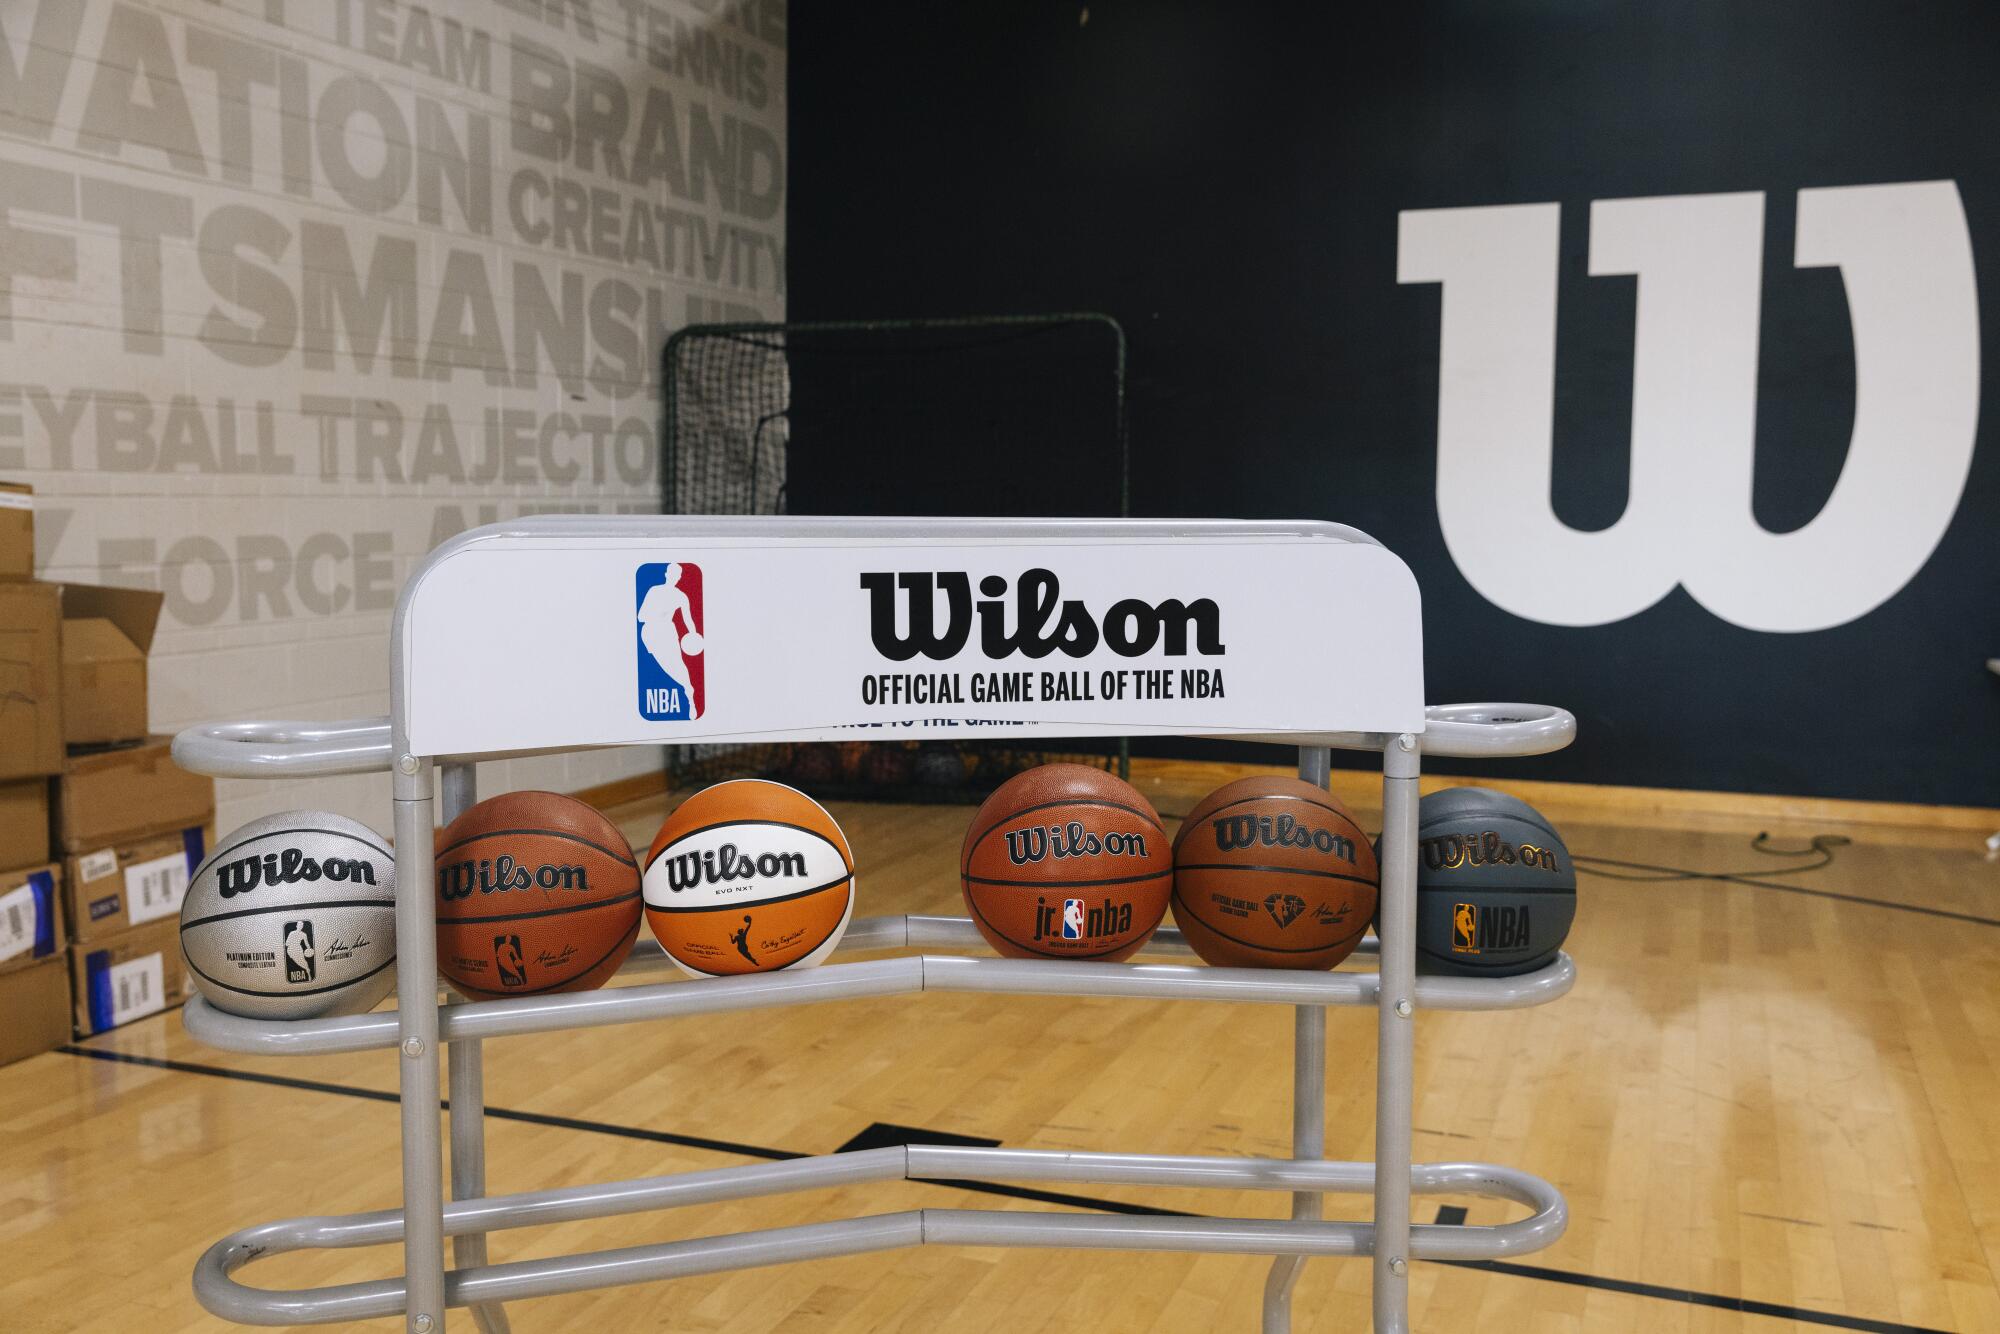 A selection of basketballs is displayed on the test court at the Wilson Innovation Center.